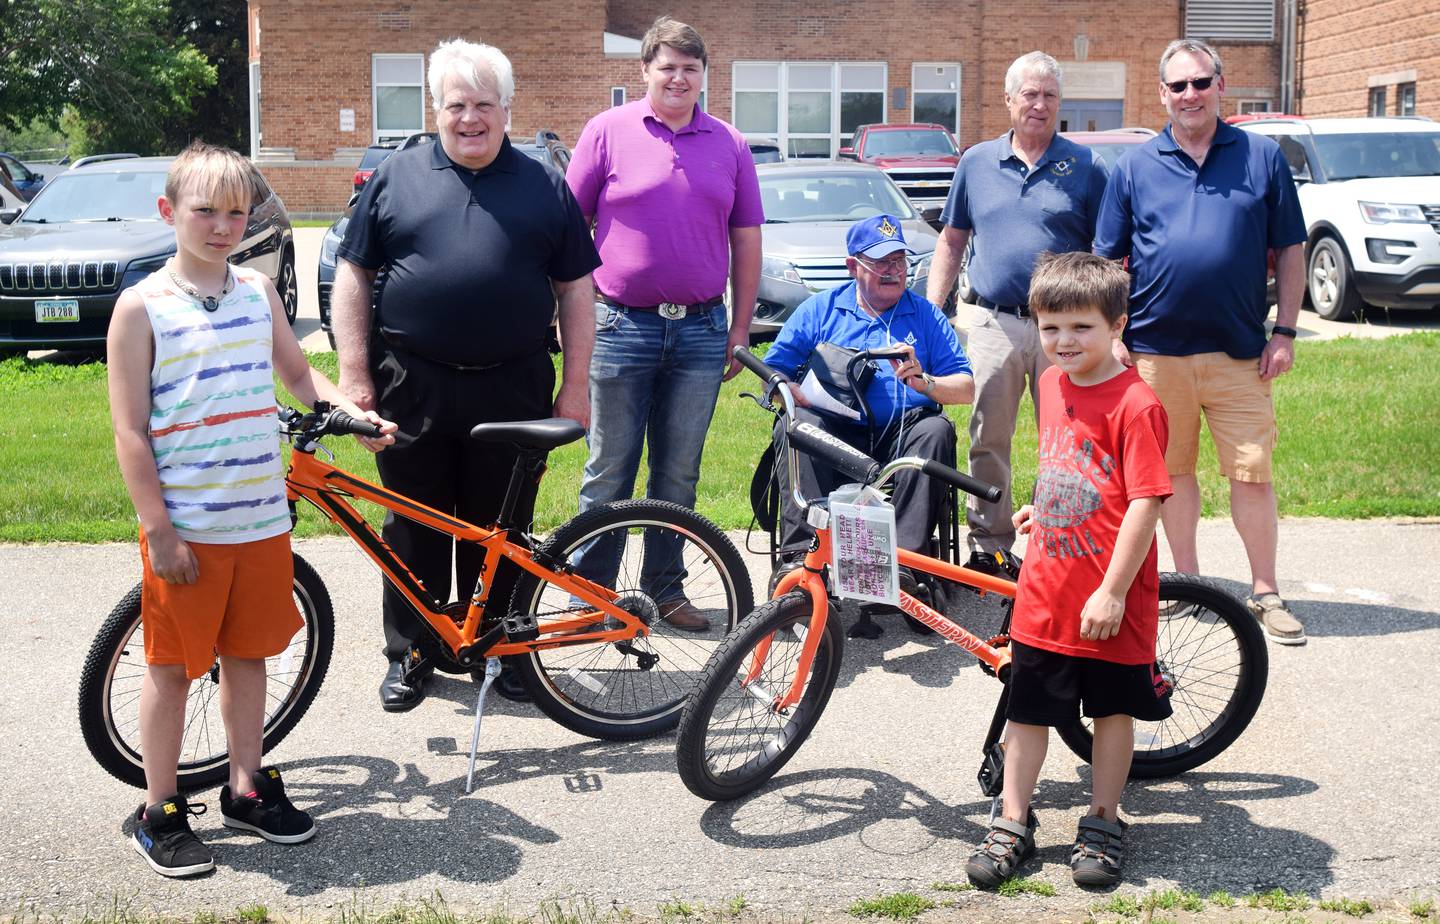 Emerson Hough Elementary students Erick Johnson-Carruthers and Abel Brown pose with their new bikes alongside members of the Newton Masonic Lodge. One third grader and one second grader from each building were selected from a drawing to win a new bike as part of the Book for a Bike program sponsored by Newton Masonic Lodge. The bikes were assembled and provided by Joe Urias, owner of Mojo Cycling.